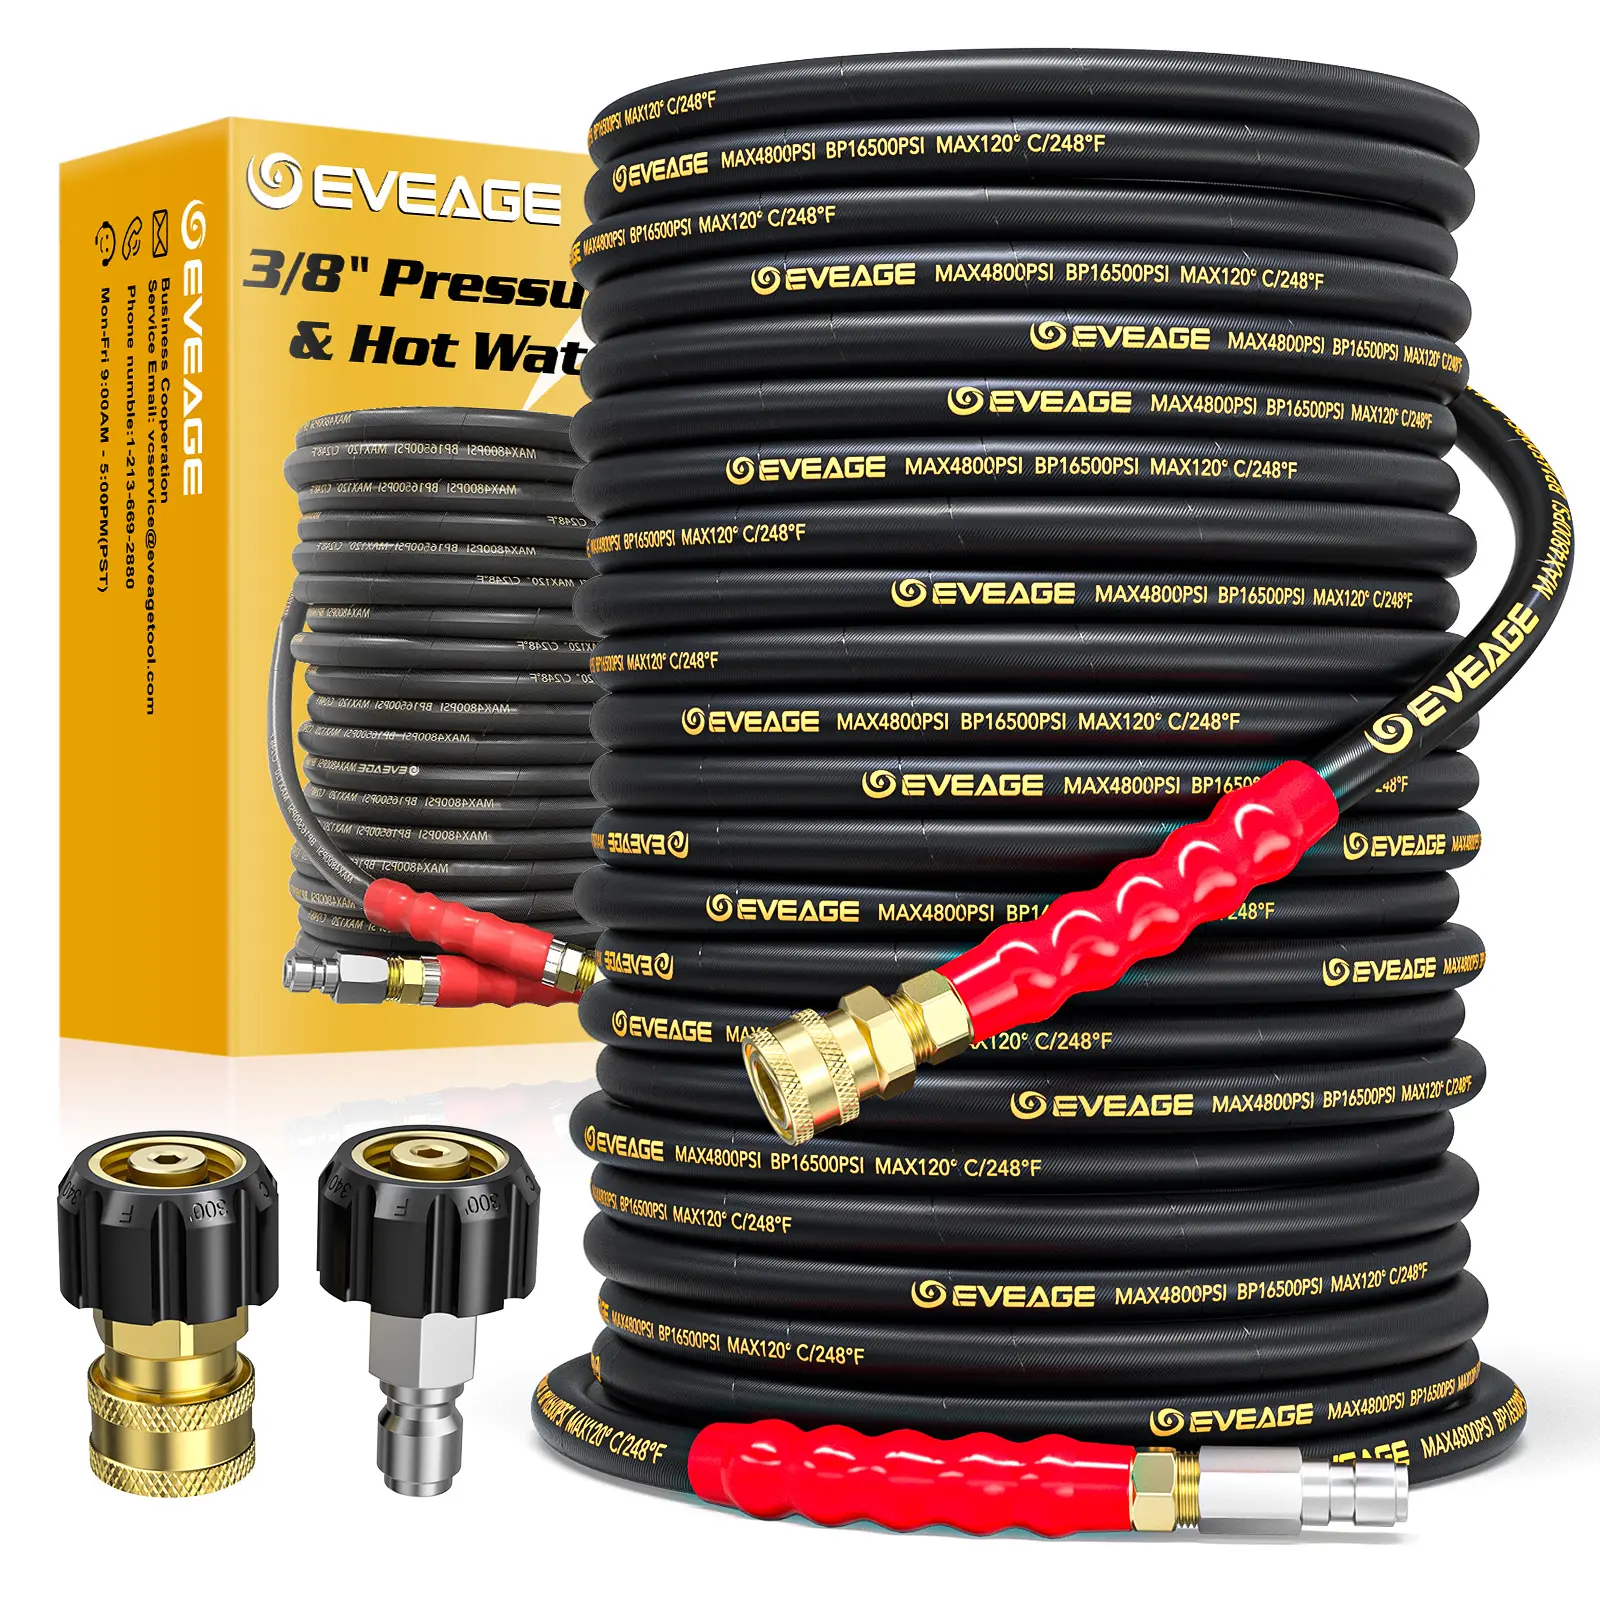 EVEAGE Pressure Washer Hose 100 ft 3/8 Inch for Cold and Hot Water 248°F End 3/8” Quick Connect, 4800psi Kink Resistant Industrial Grade Steel Wire Braided, 2pcs M22-14mm Swivel to 3/8” Adapter Kit